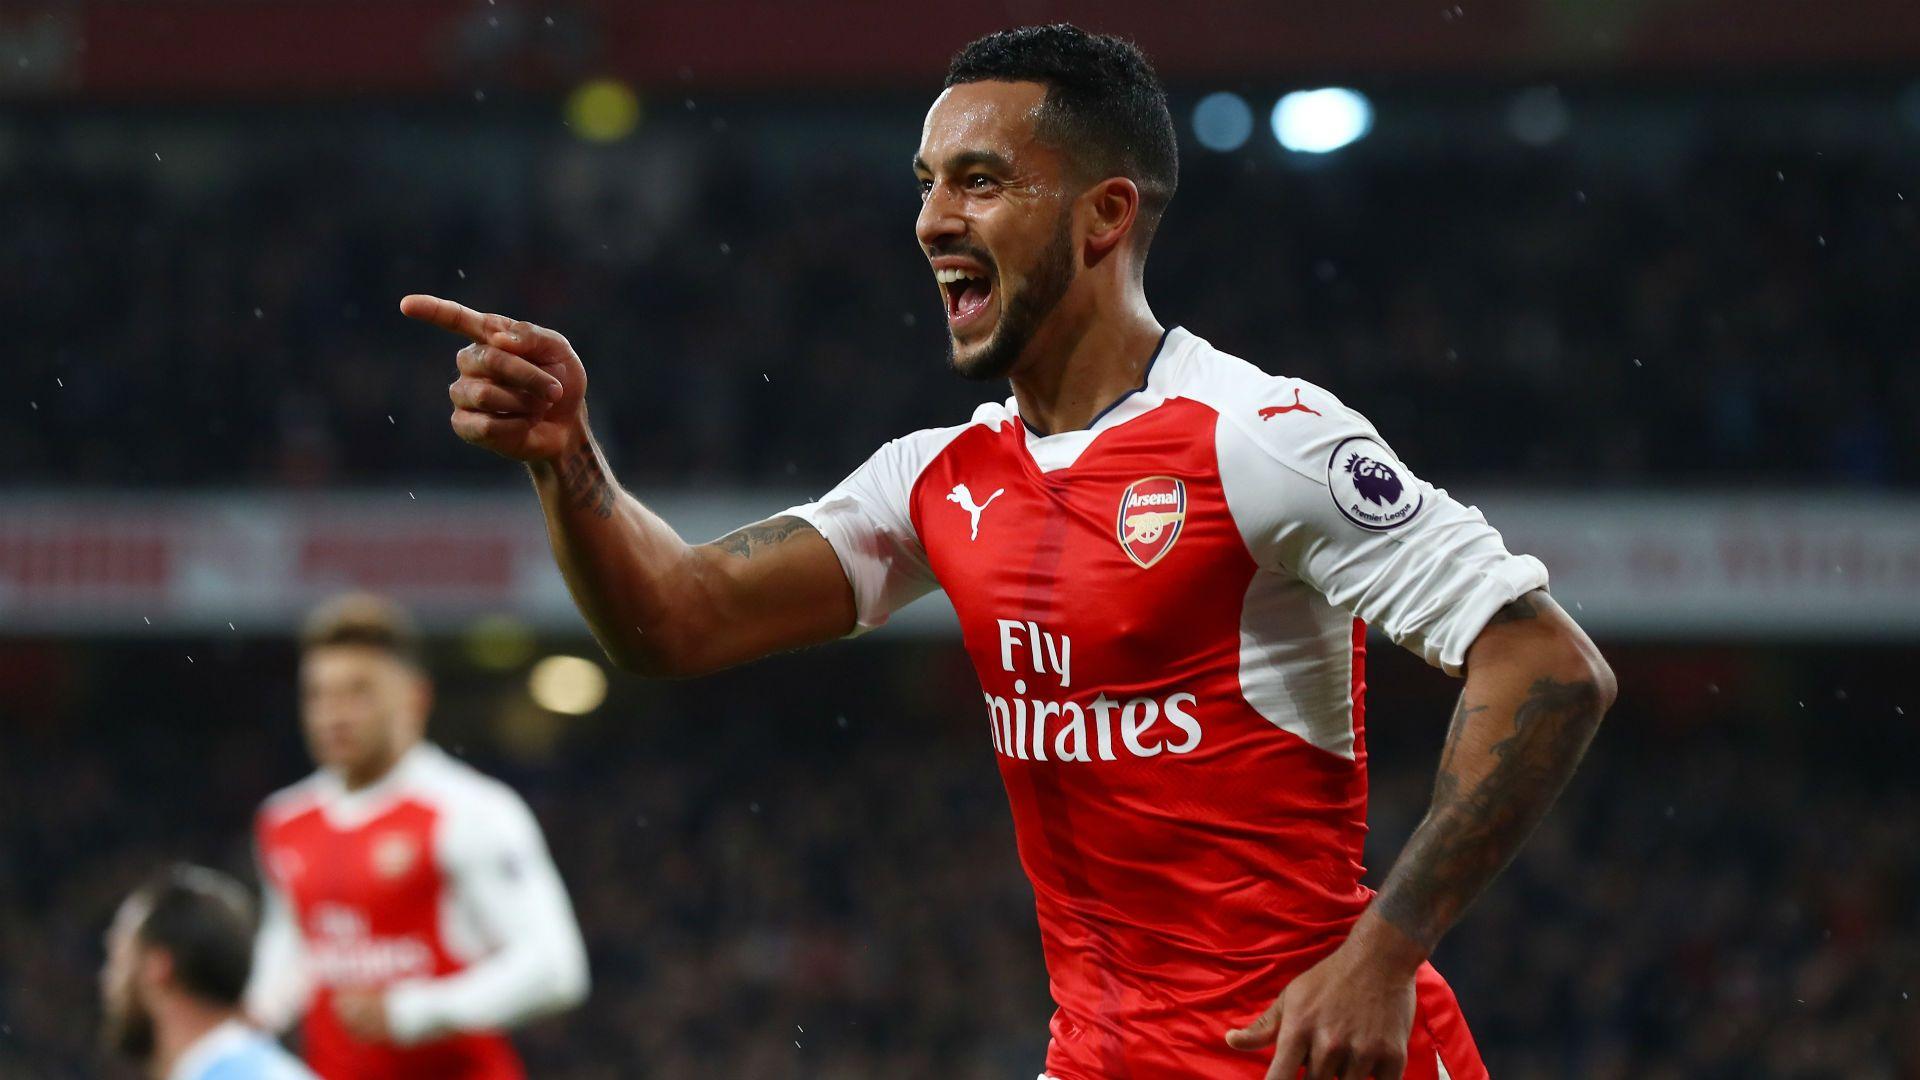 Wenger explains why Walcott is substituted so often